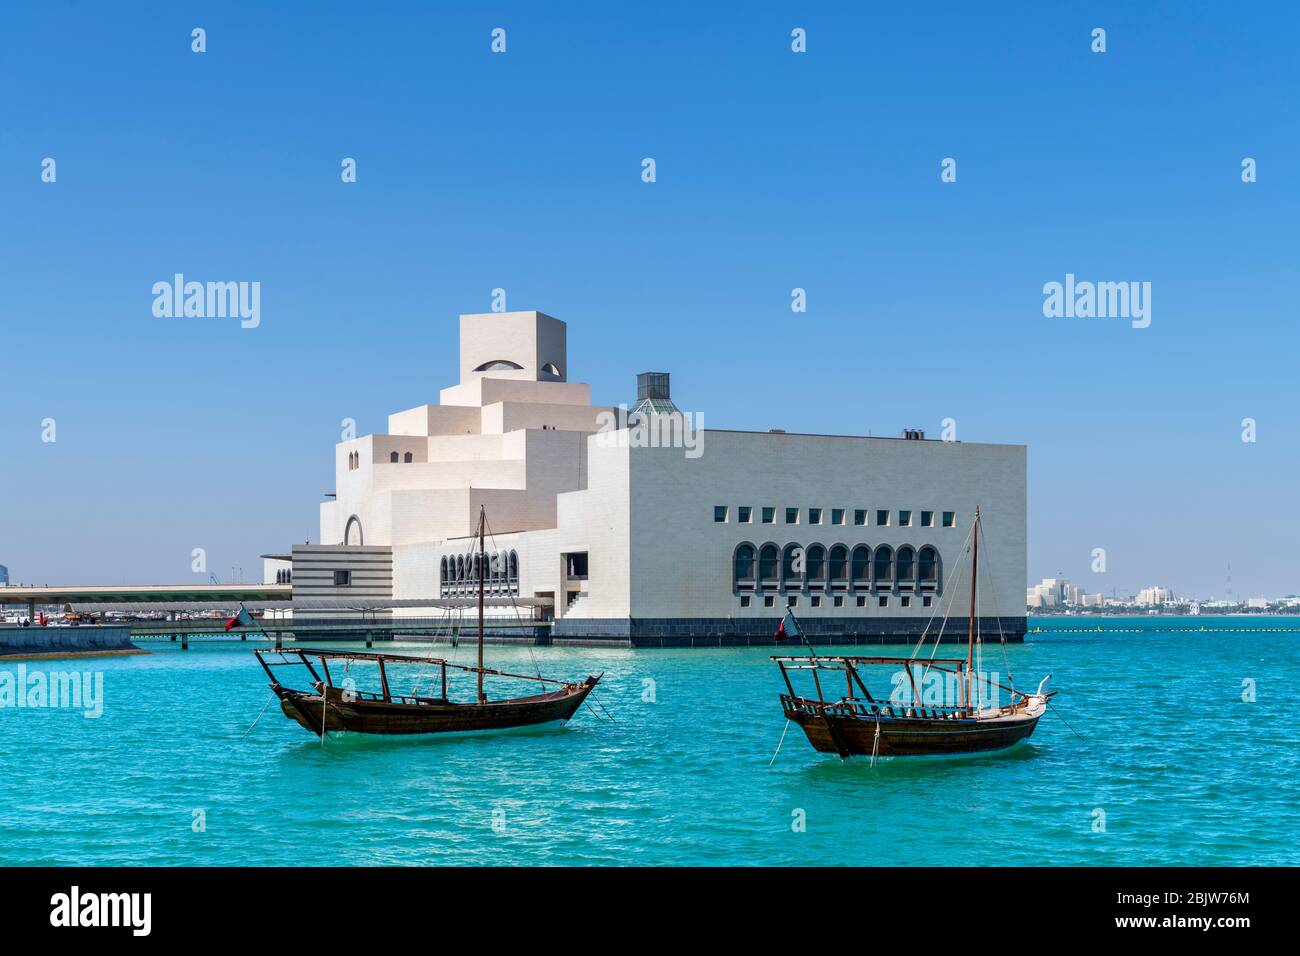 The Museum of Islamic Art from MIA Park with dhows in the foreground, Doha, Qatar, Middle East Stock Photo